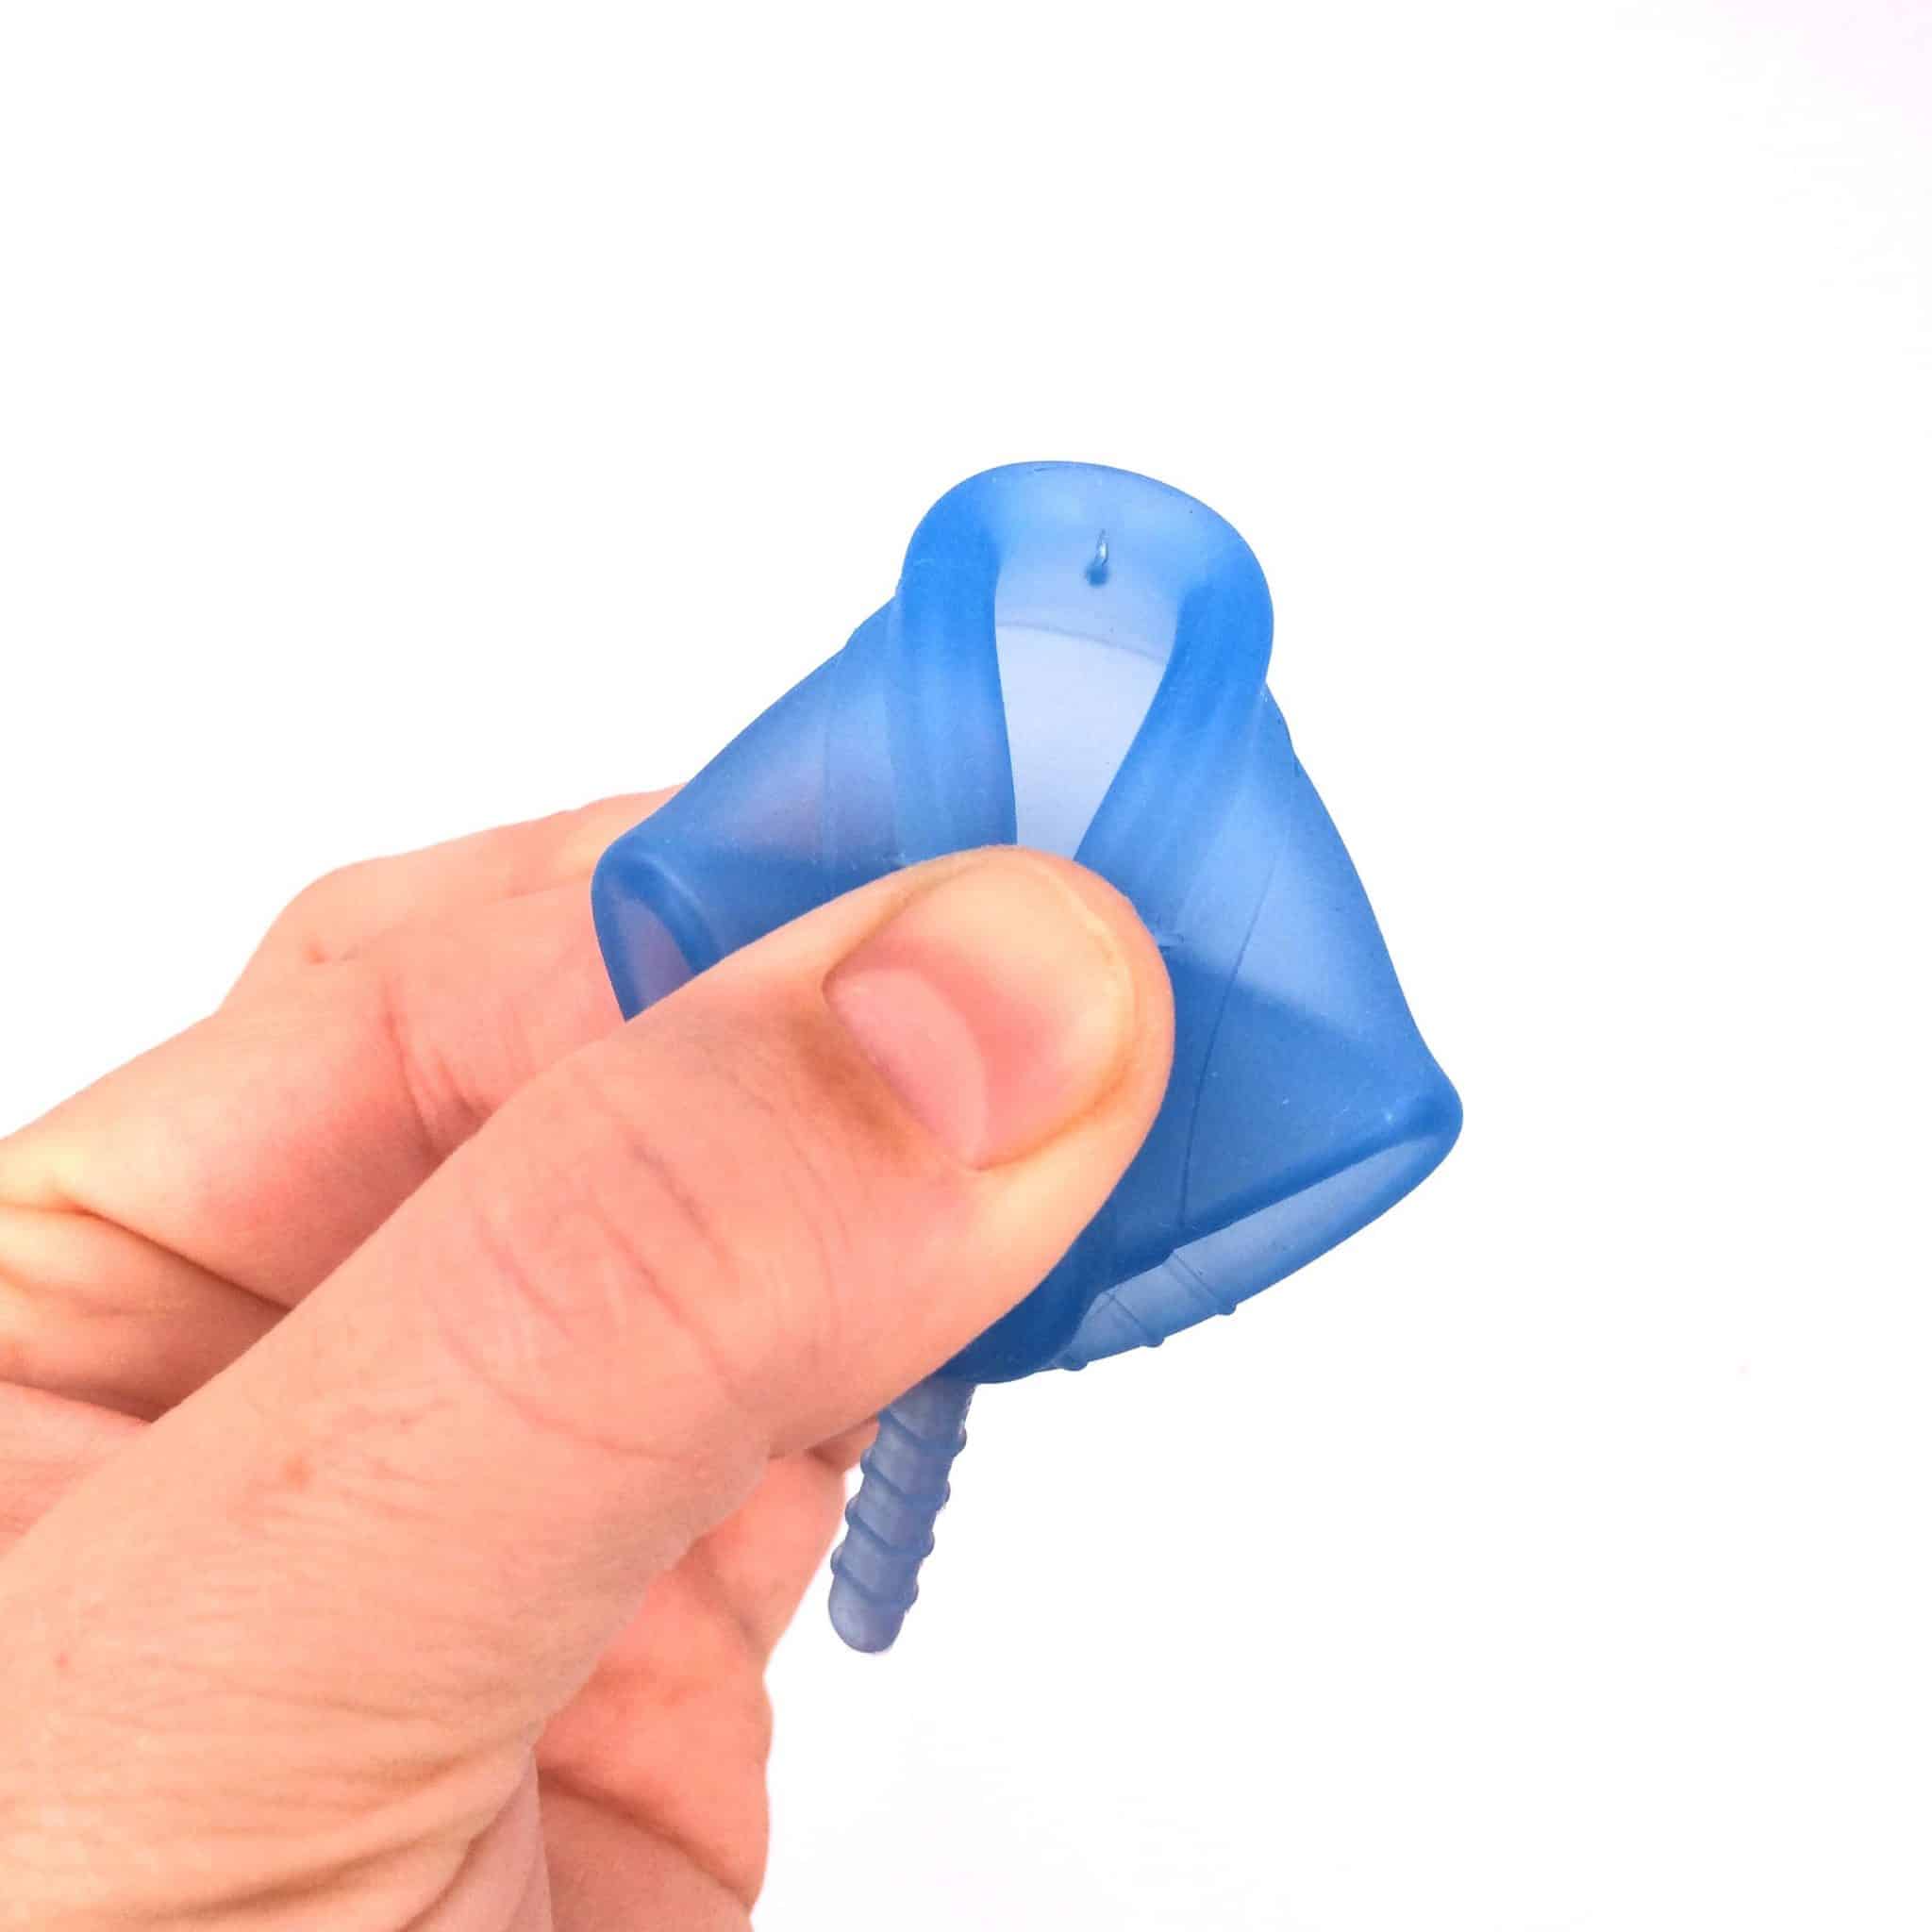 Menstrual collector folds: 15 shapes for you to choose your favorite